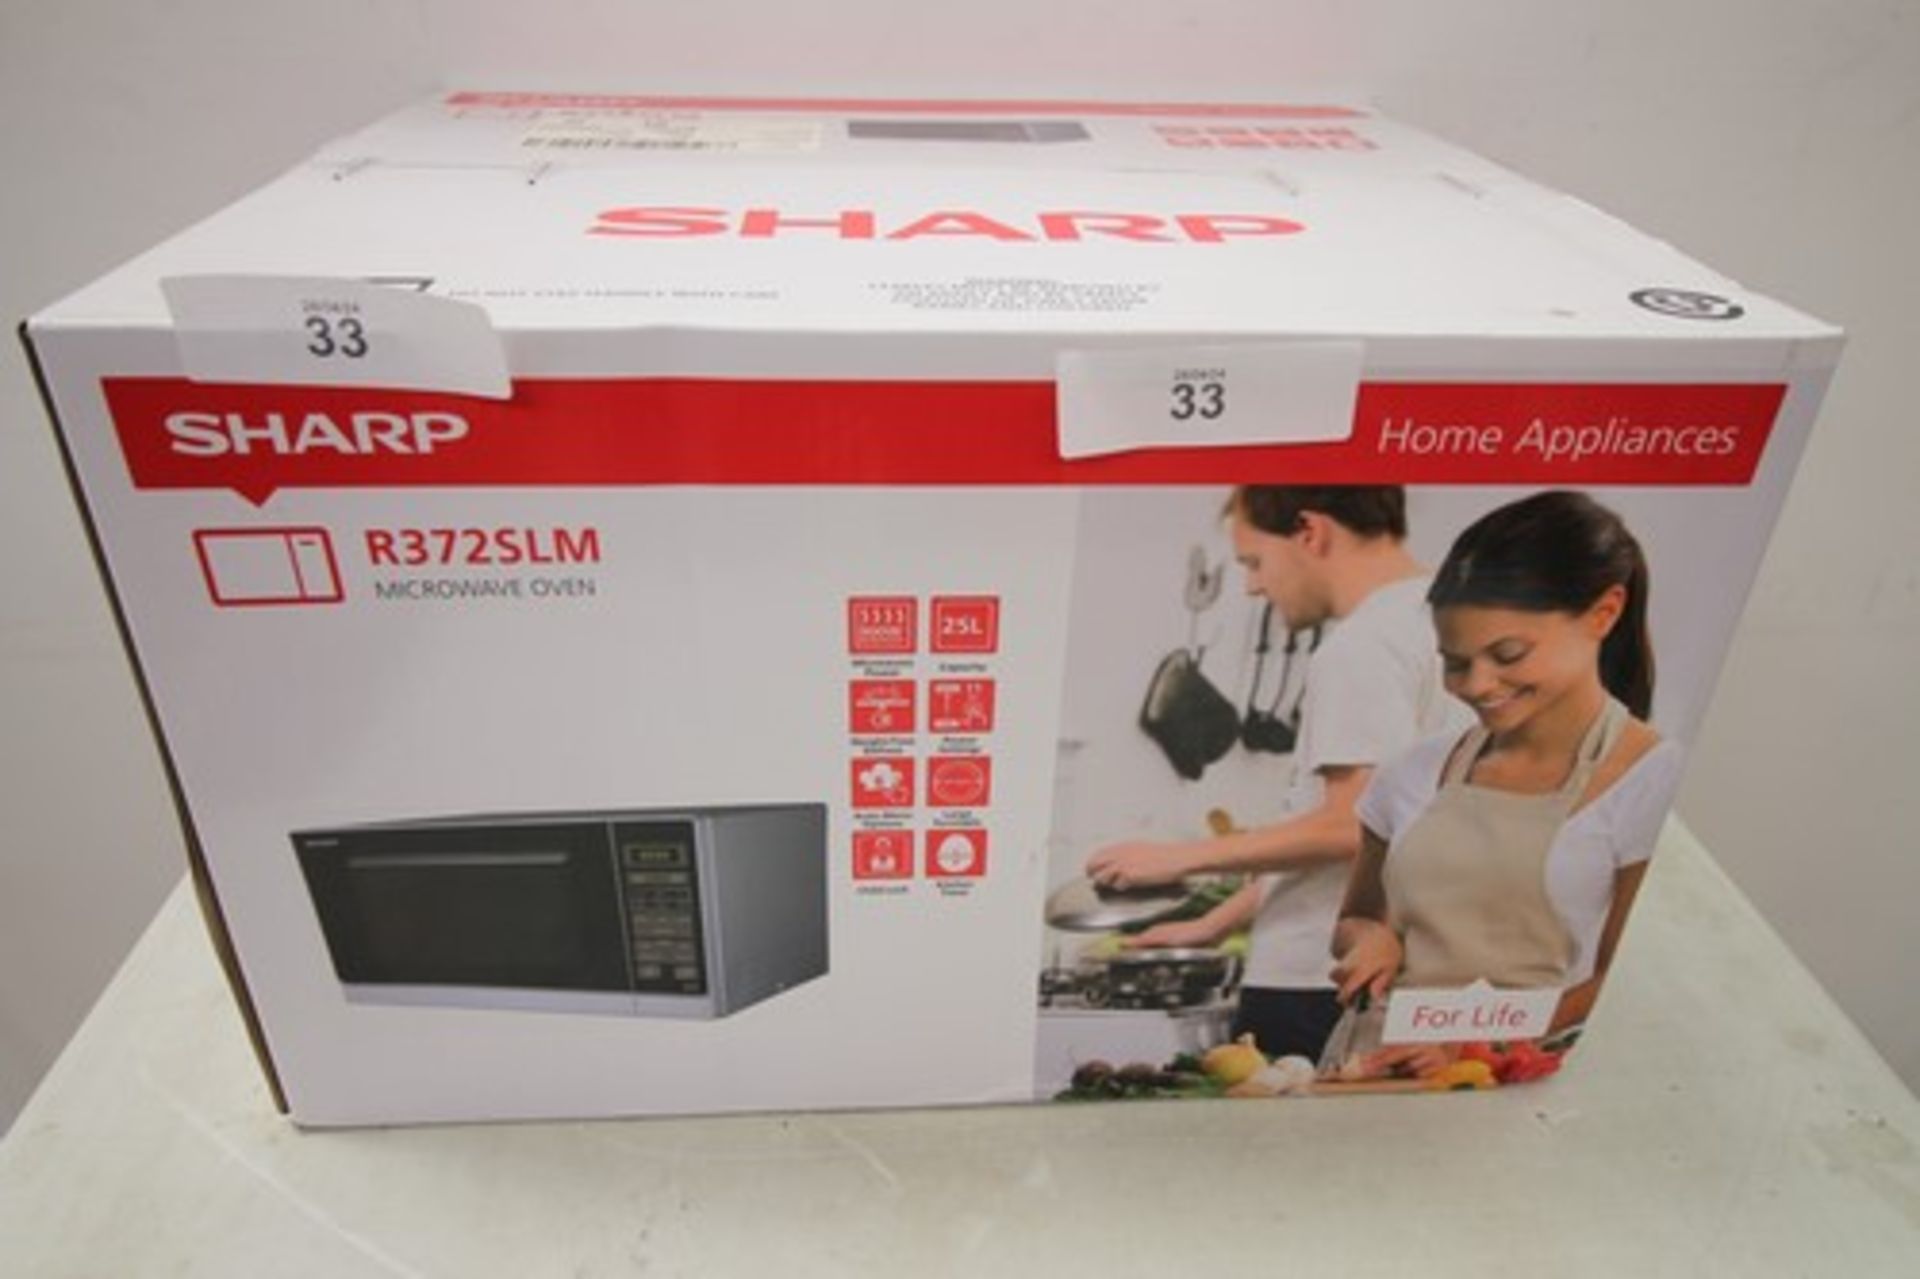 1 x Sharp 900w 25L microwave oven, model No: R3725LM - new in box (ES1)